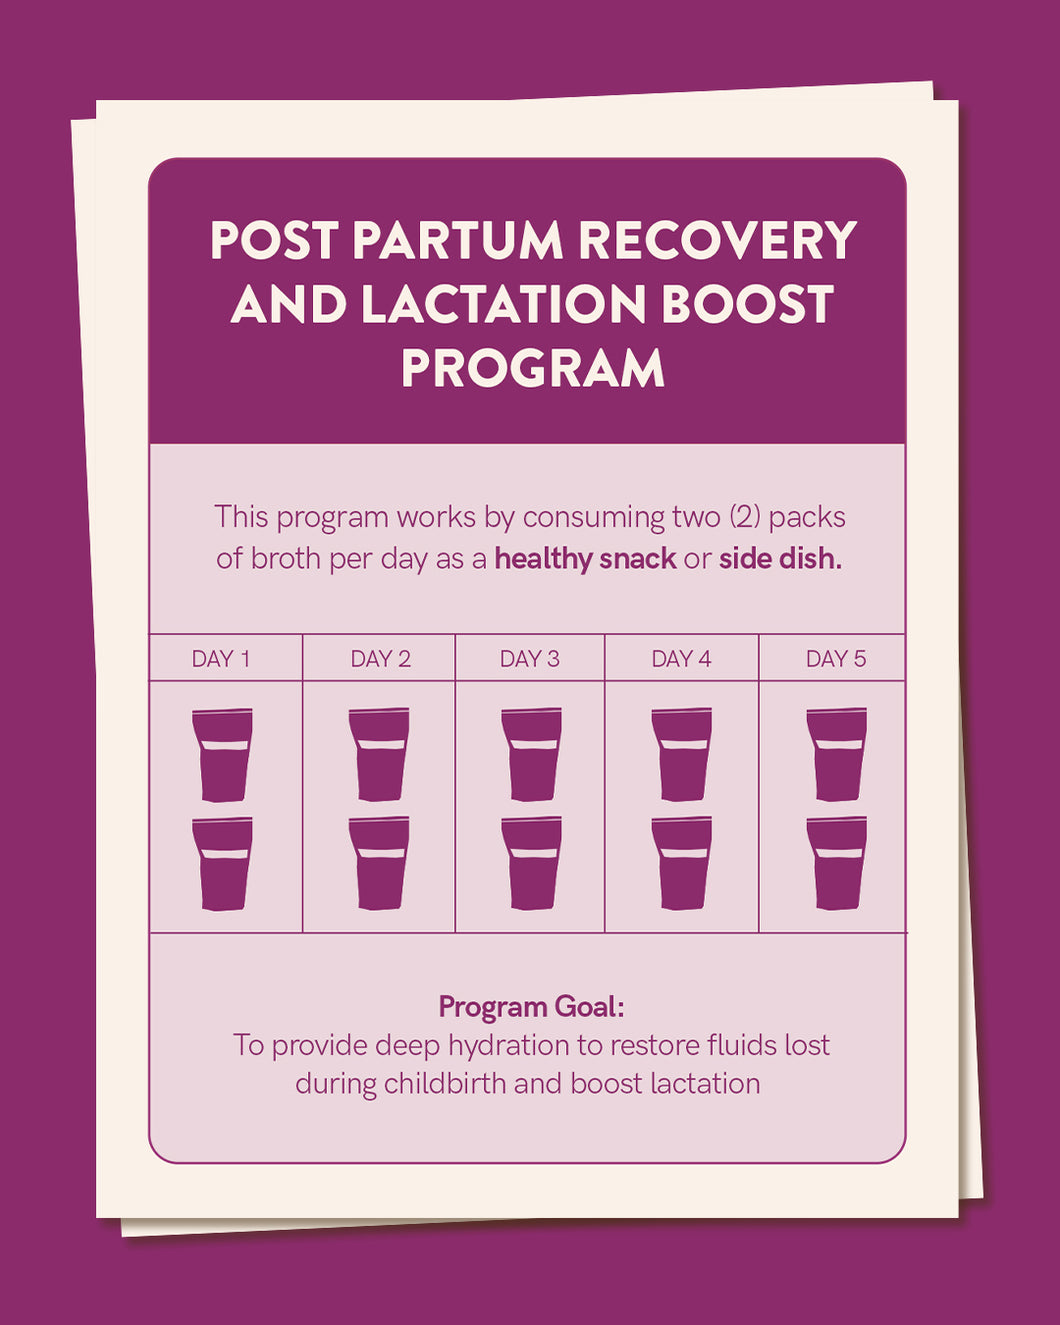 Post Partum Recovery and Lactation Boost Program